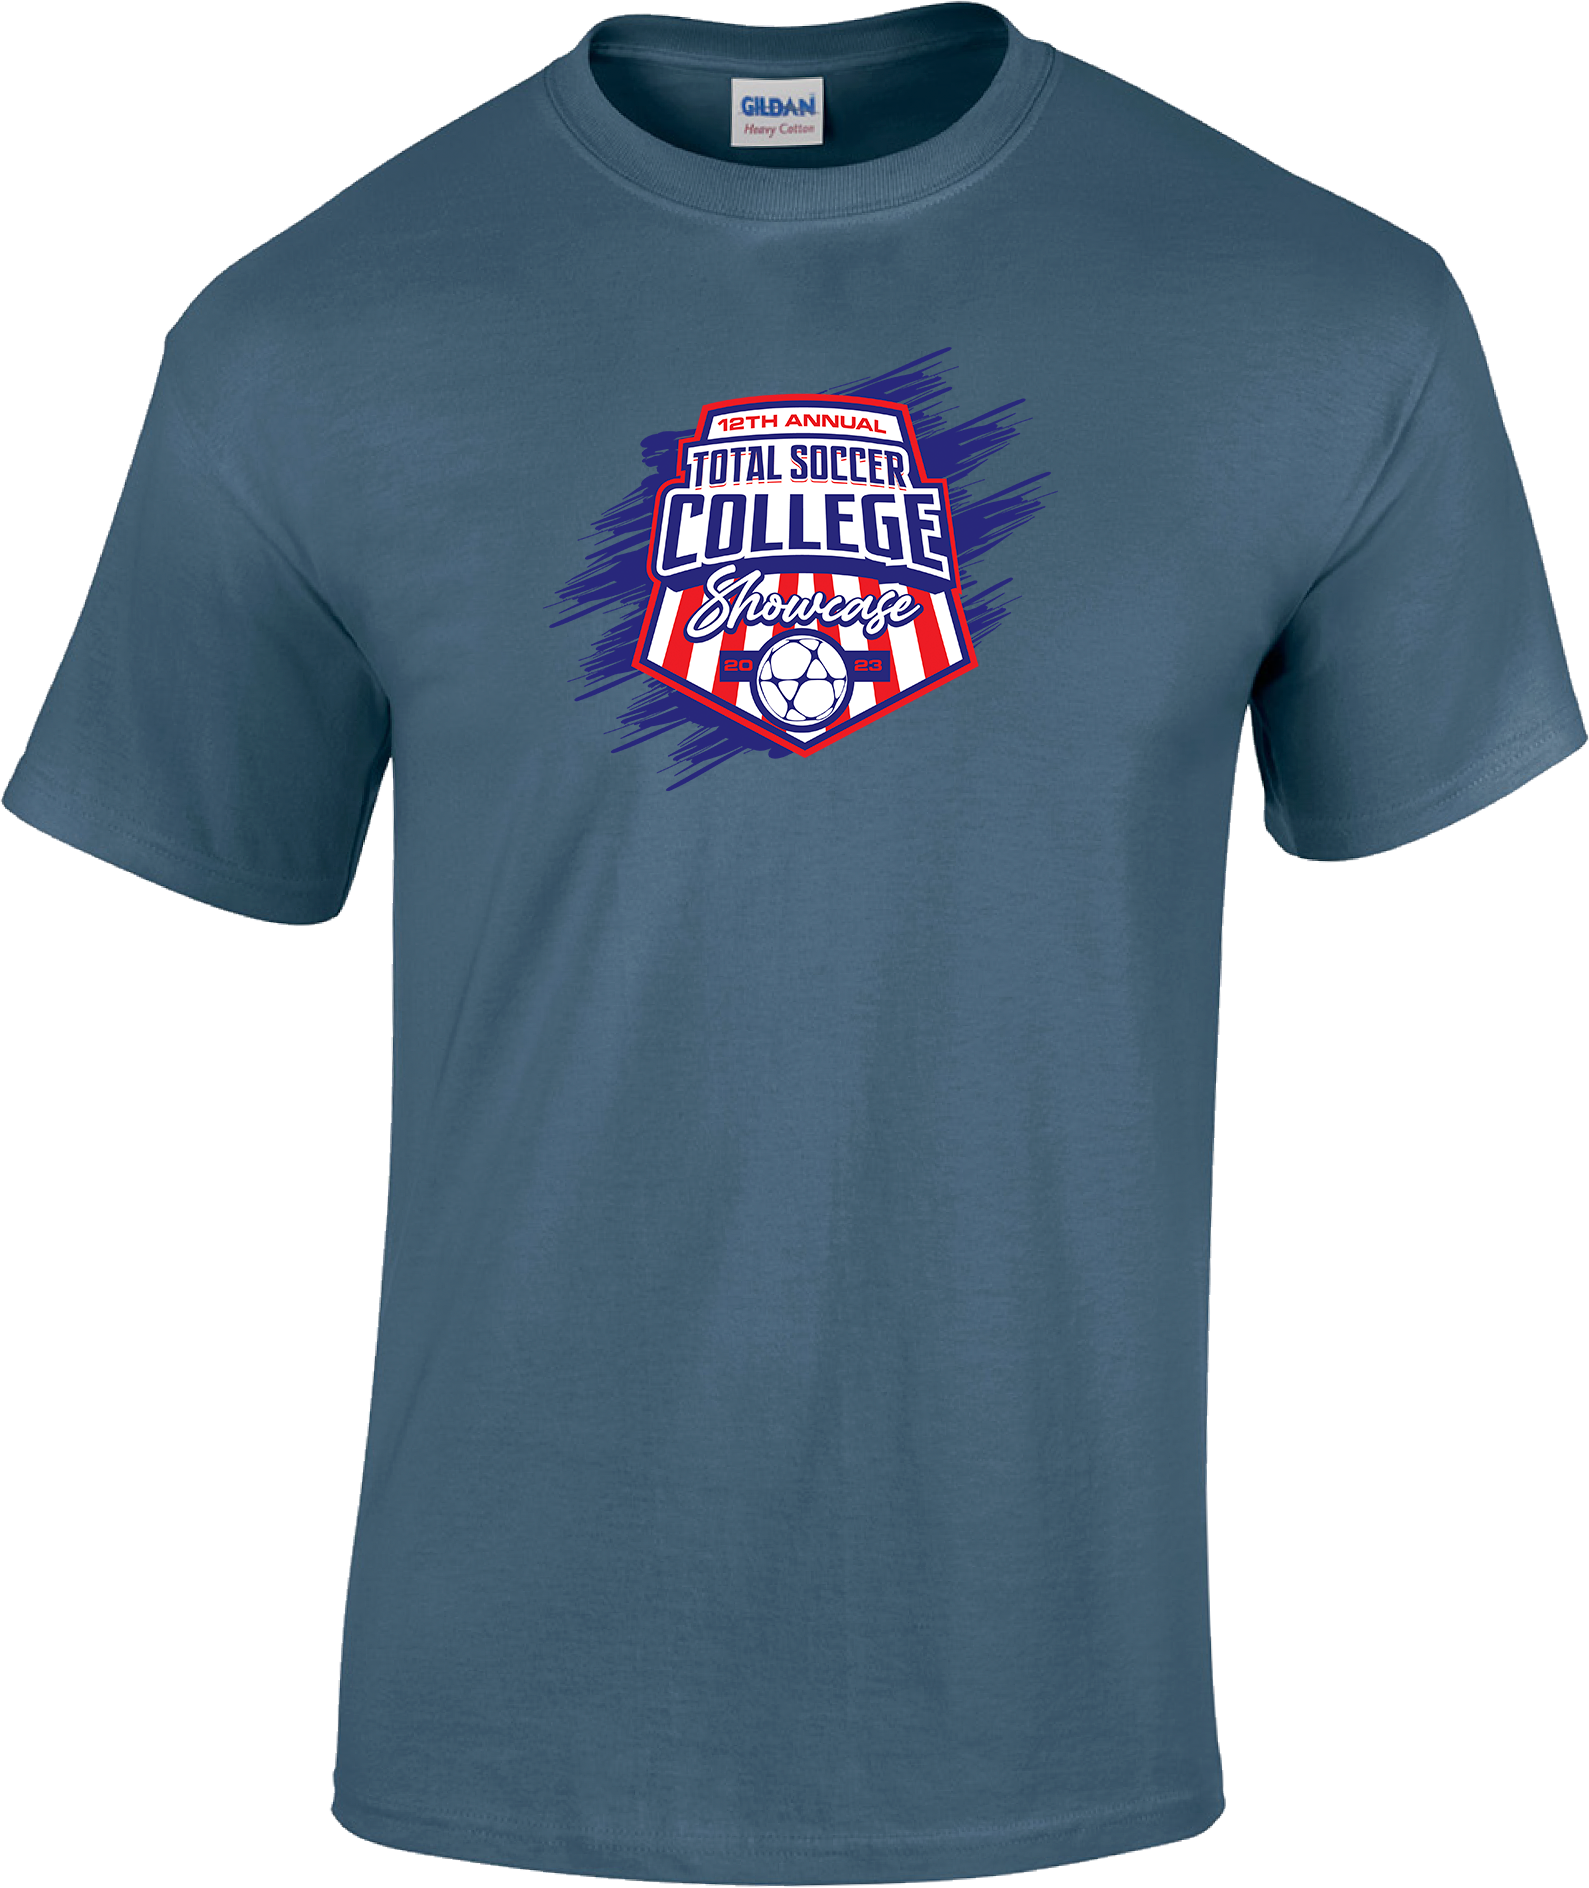 SHORT SLEEVES - 2023 Total Soccer College Showcase